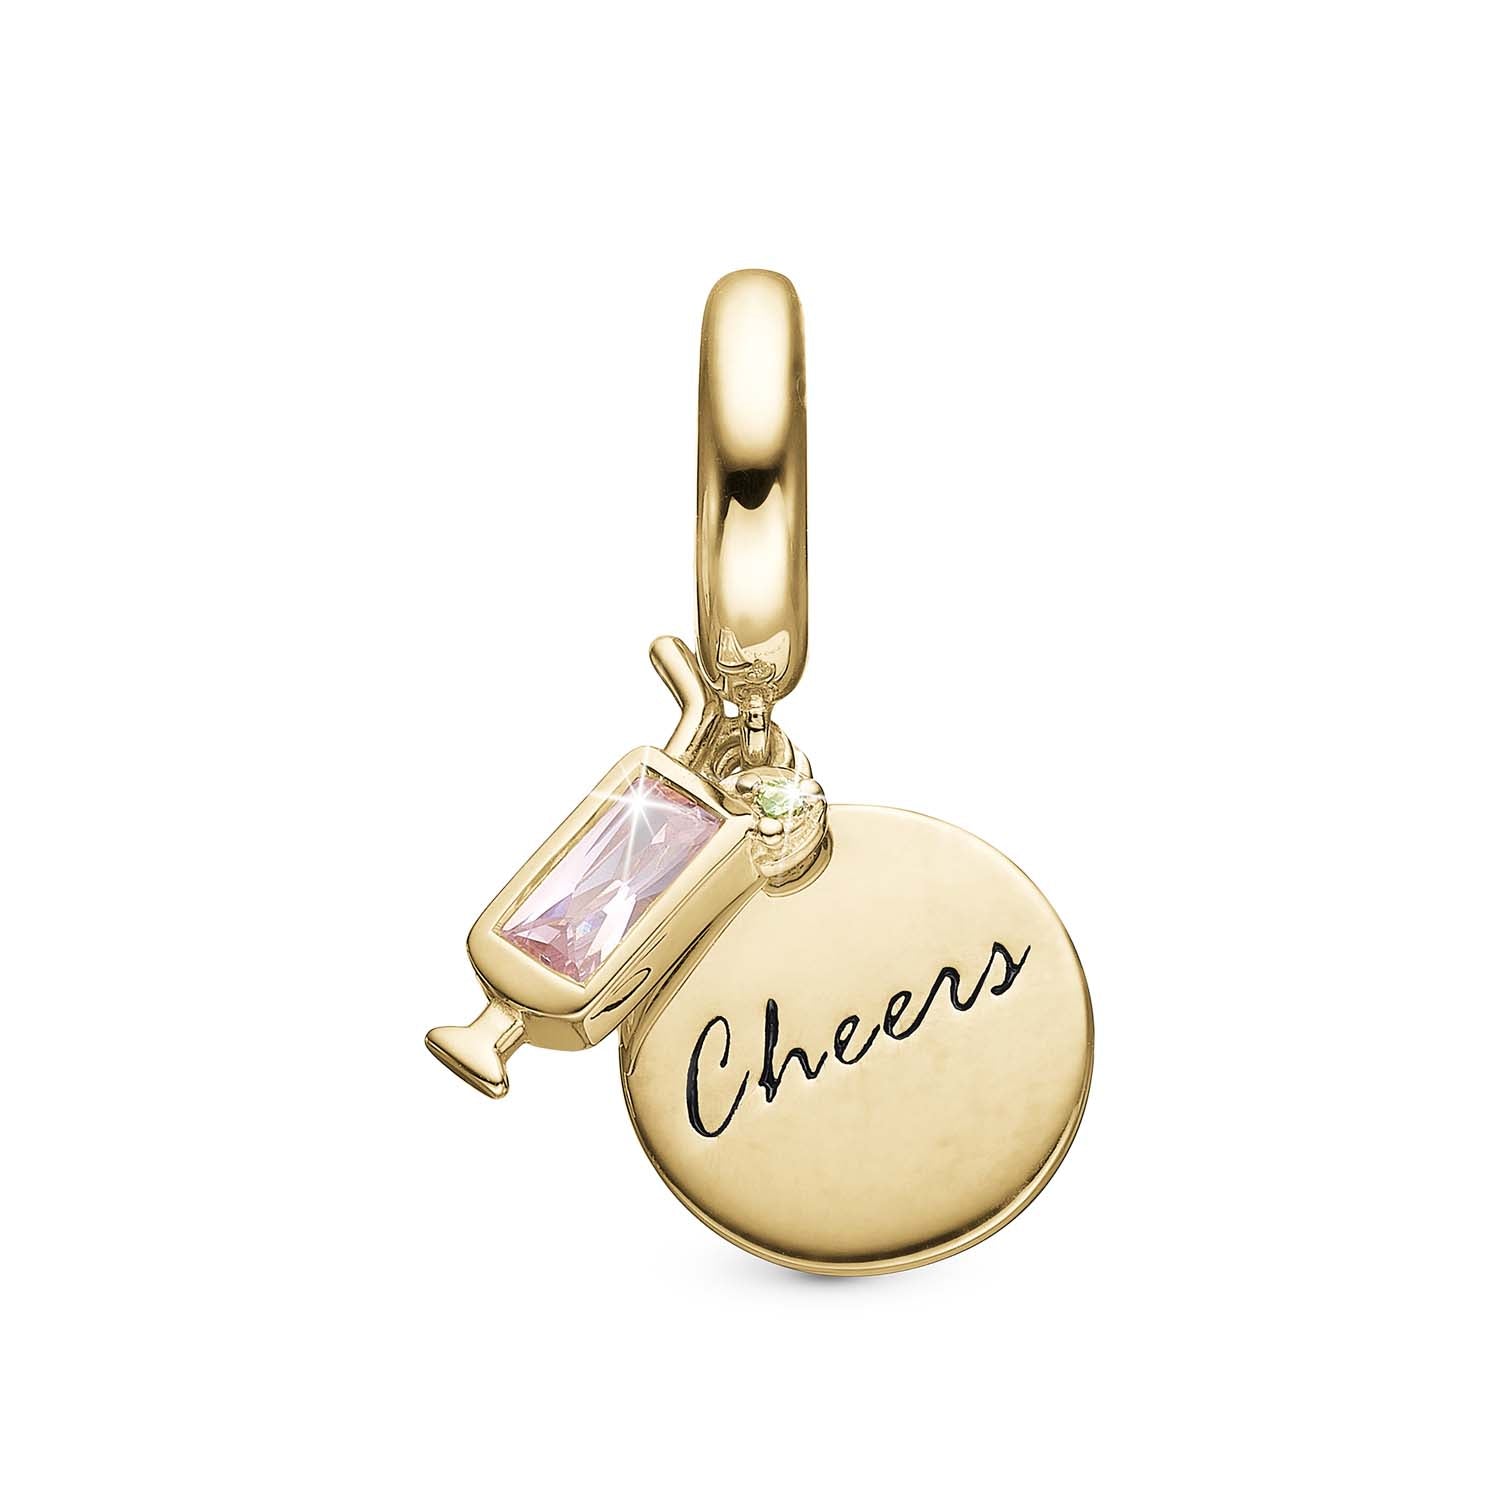 Billede af Christina Design London Jewelry & Watches - Cheers Charm forgyldt 6 mm.